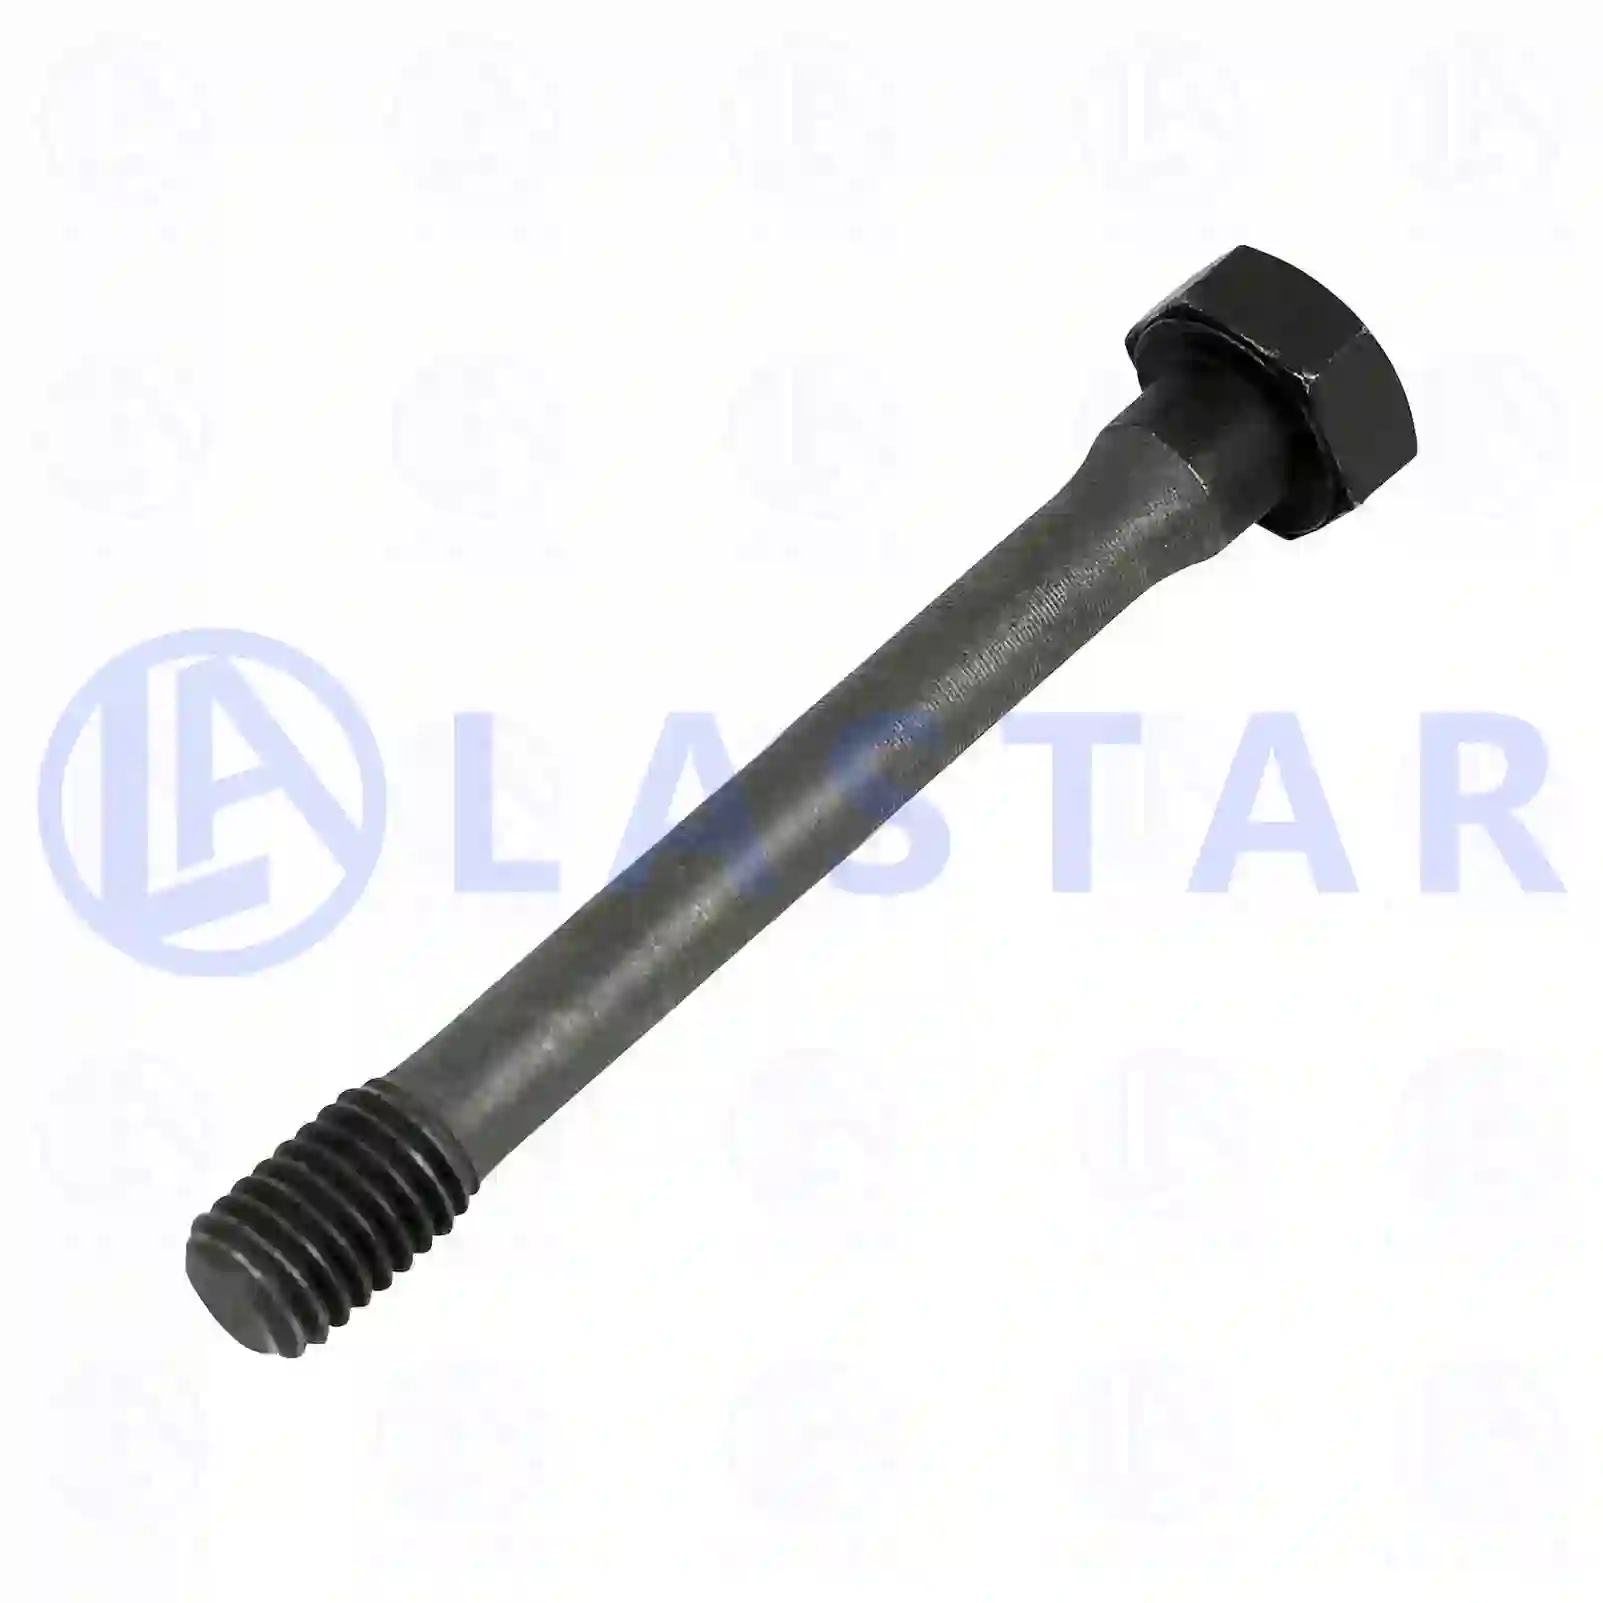  Cylinder head screw || Lastar Spare Part | Truck Spare Parts, Auotomotive Spare Parts